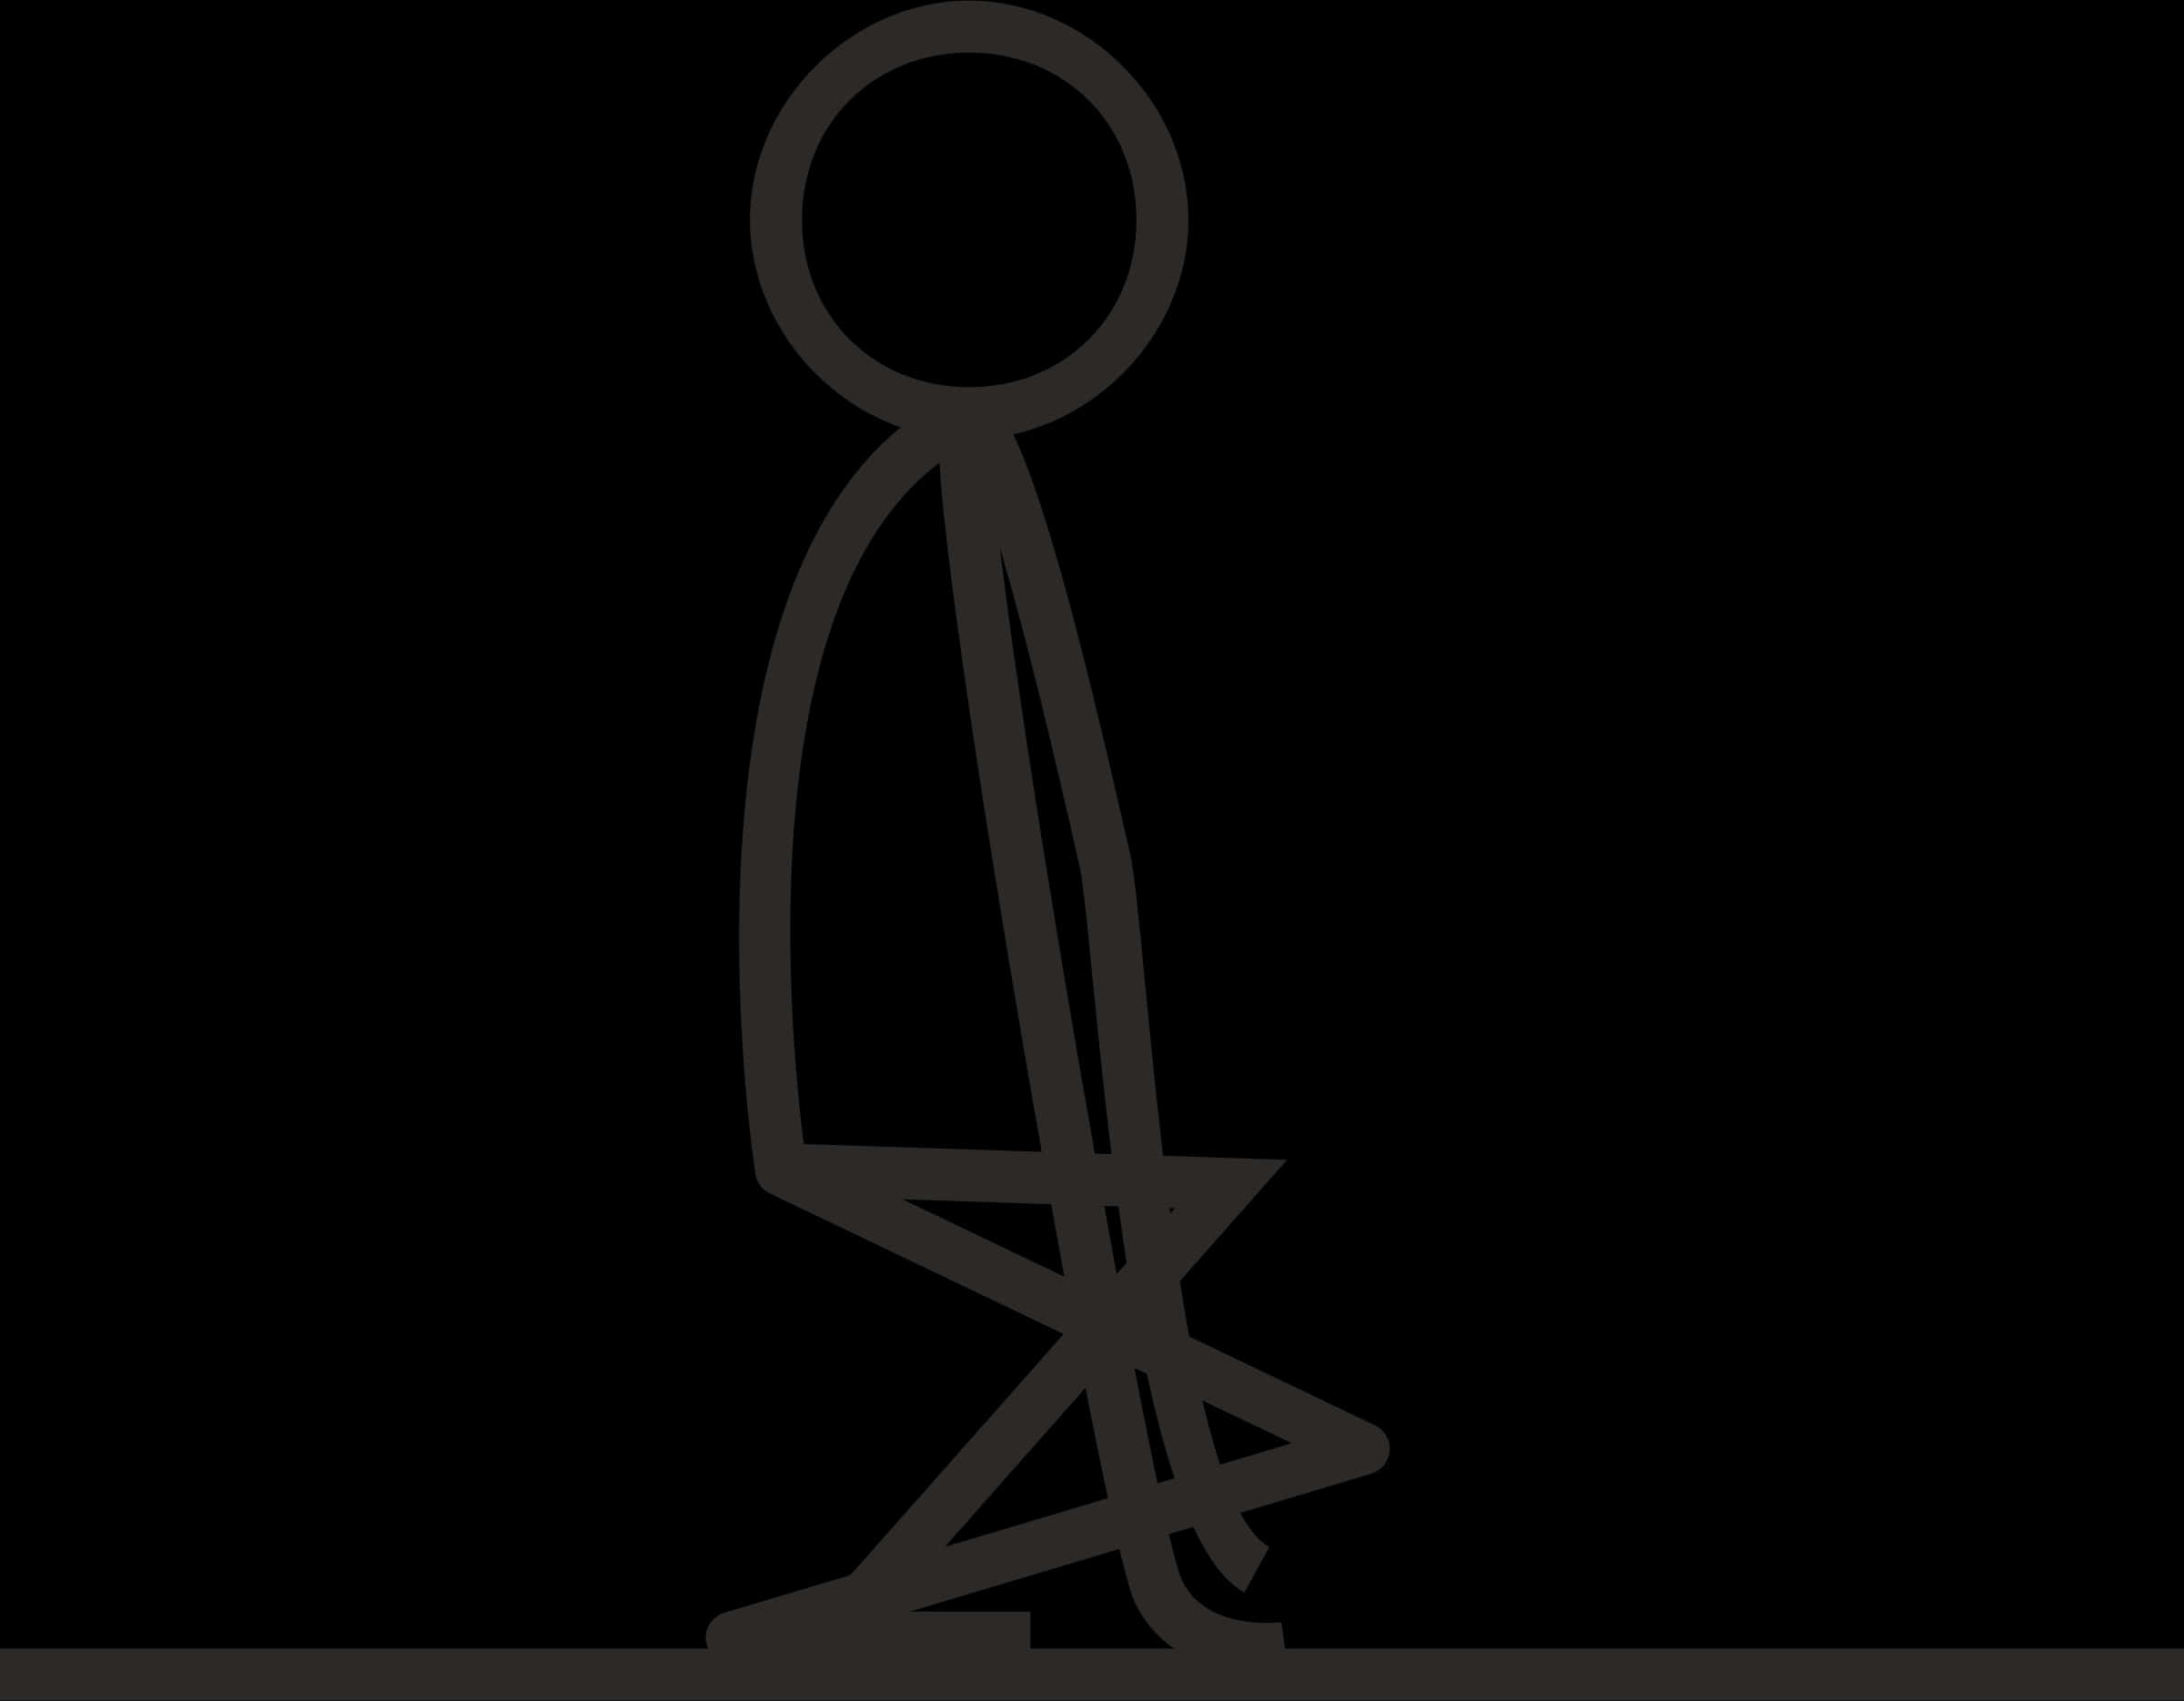 Stickman Sitting Silhouette PNG image